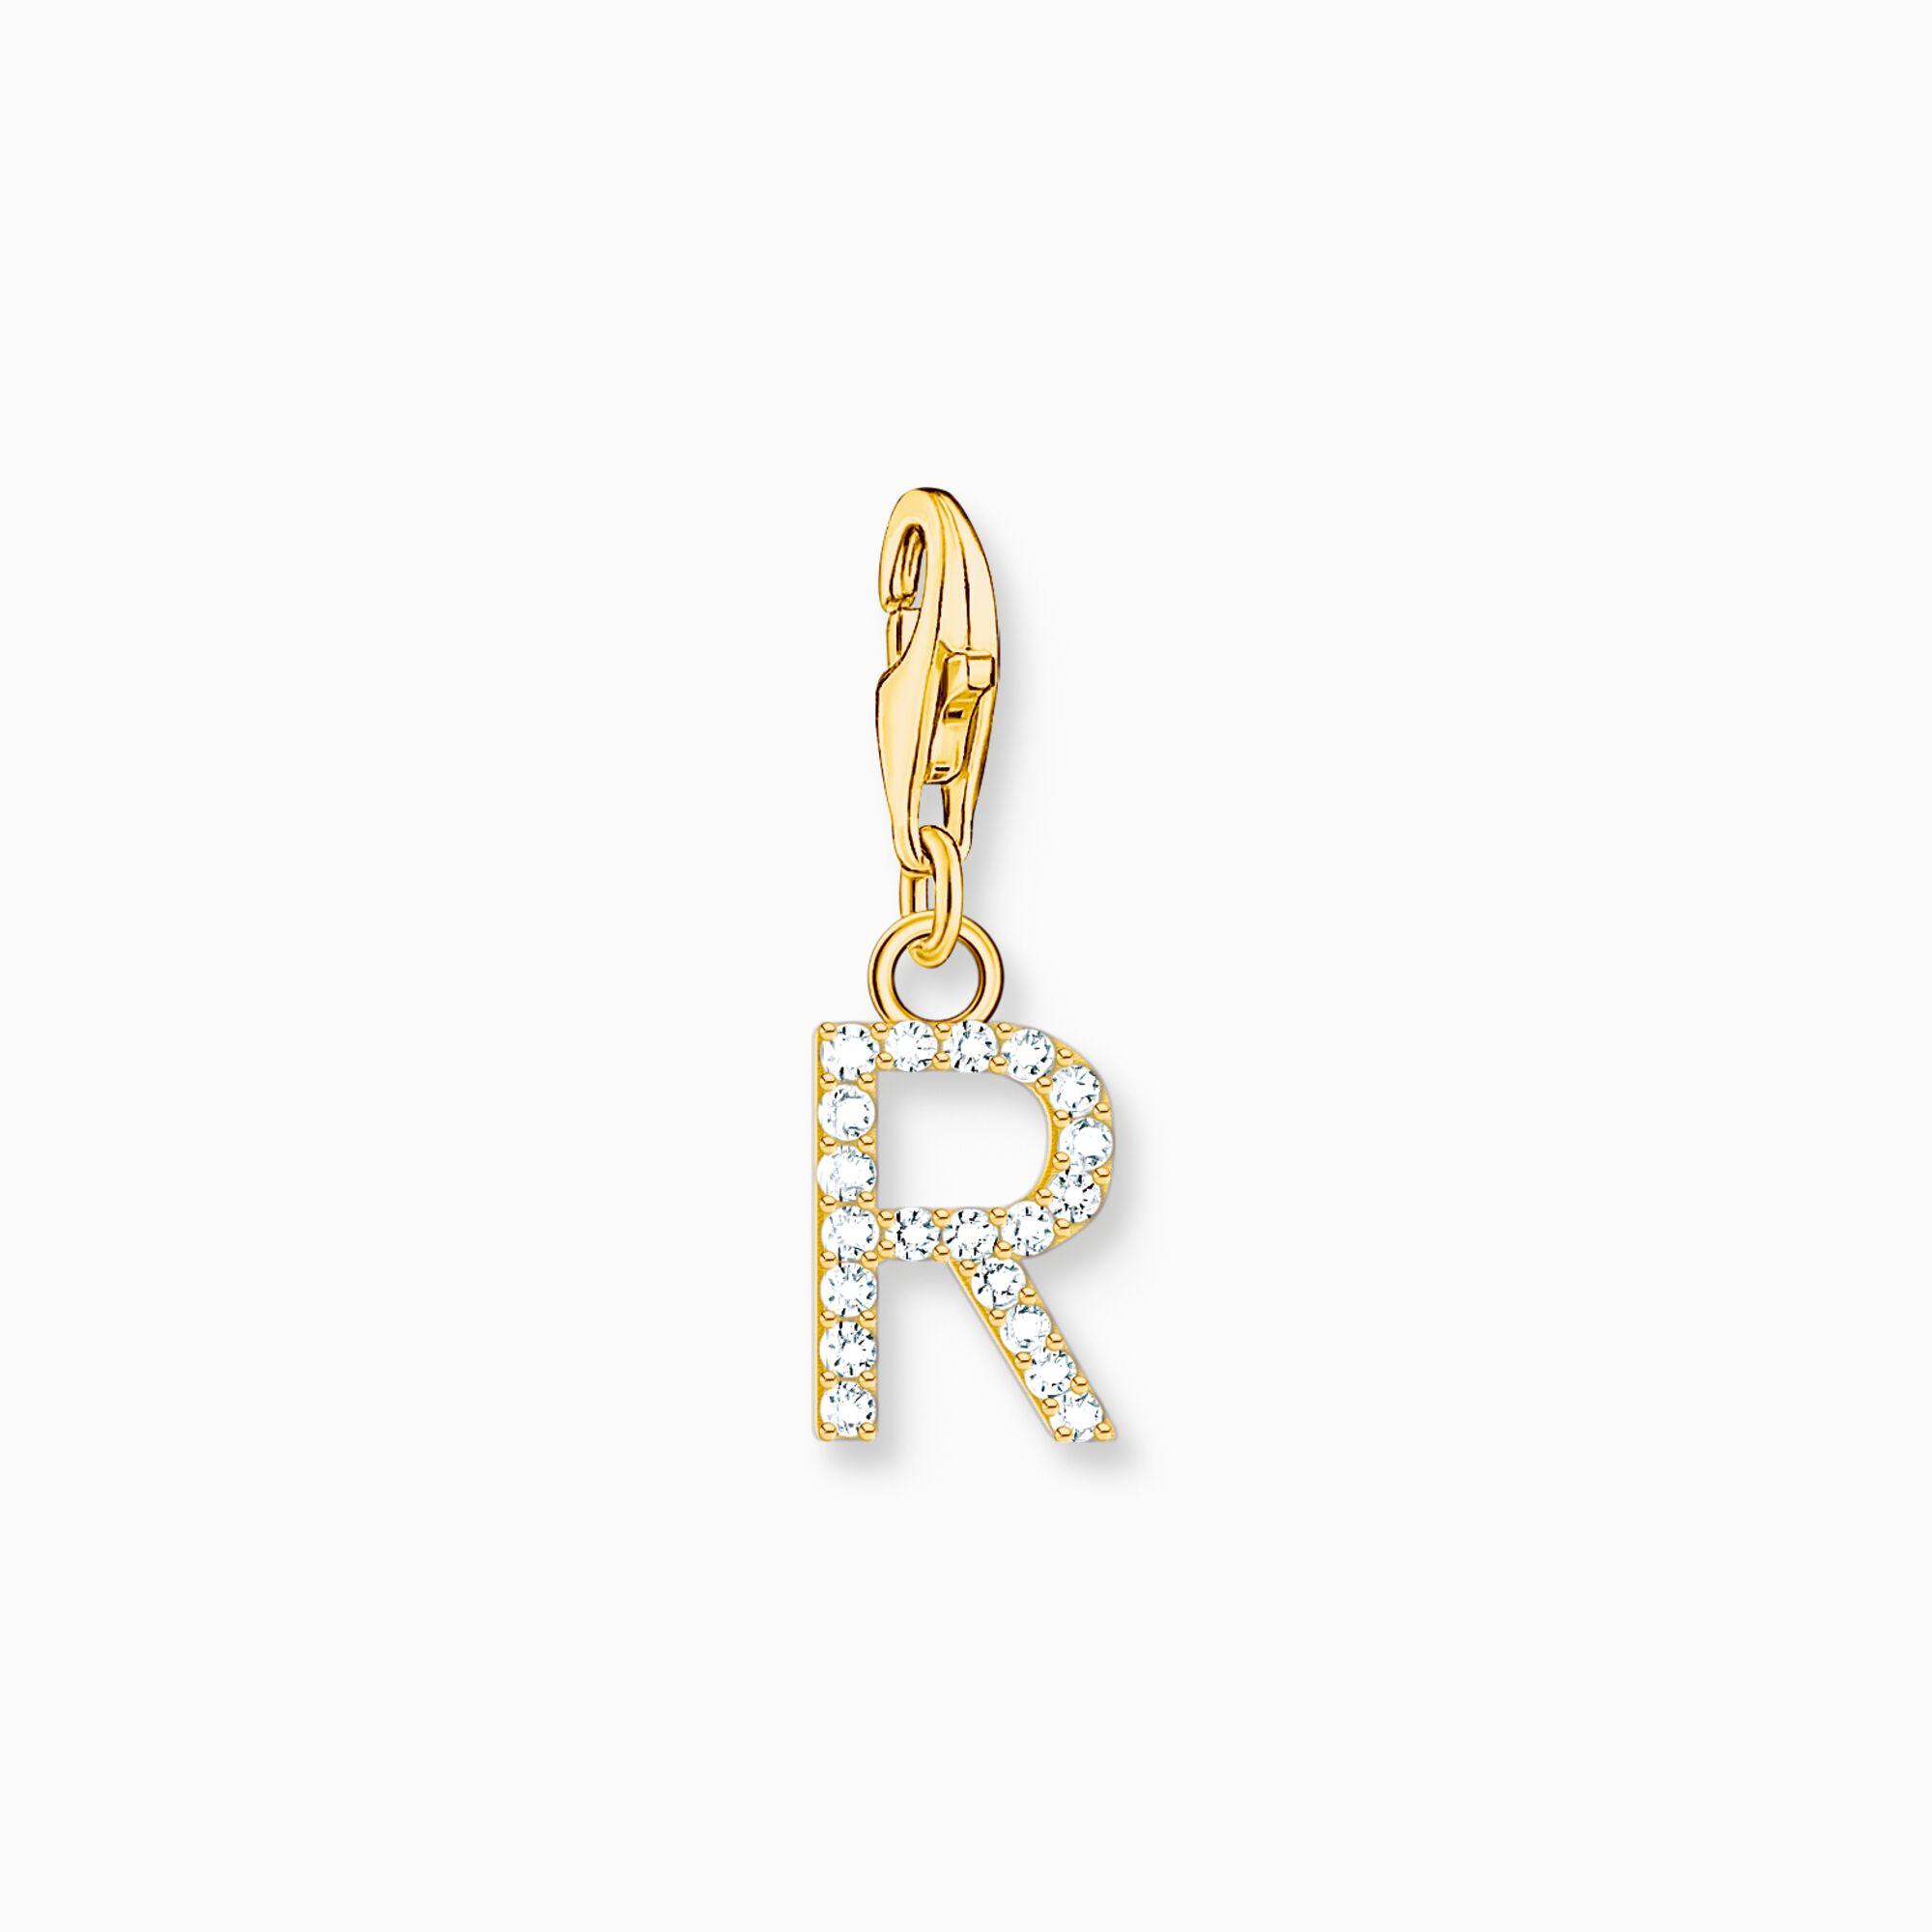 Charm pendant letter R with white stones gold plated from the Charm Club collection in the THOMAS SABO online store